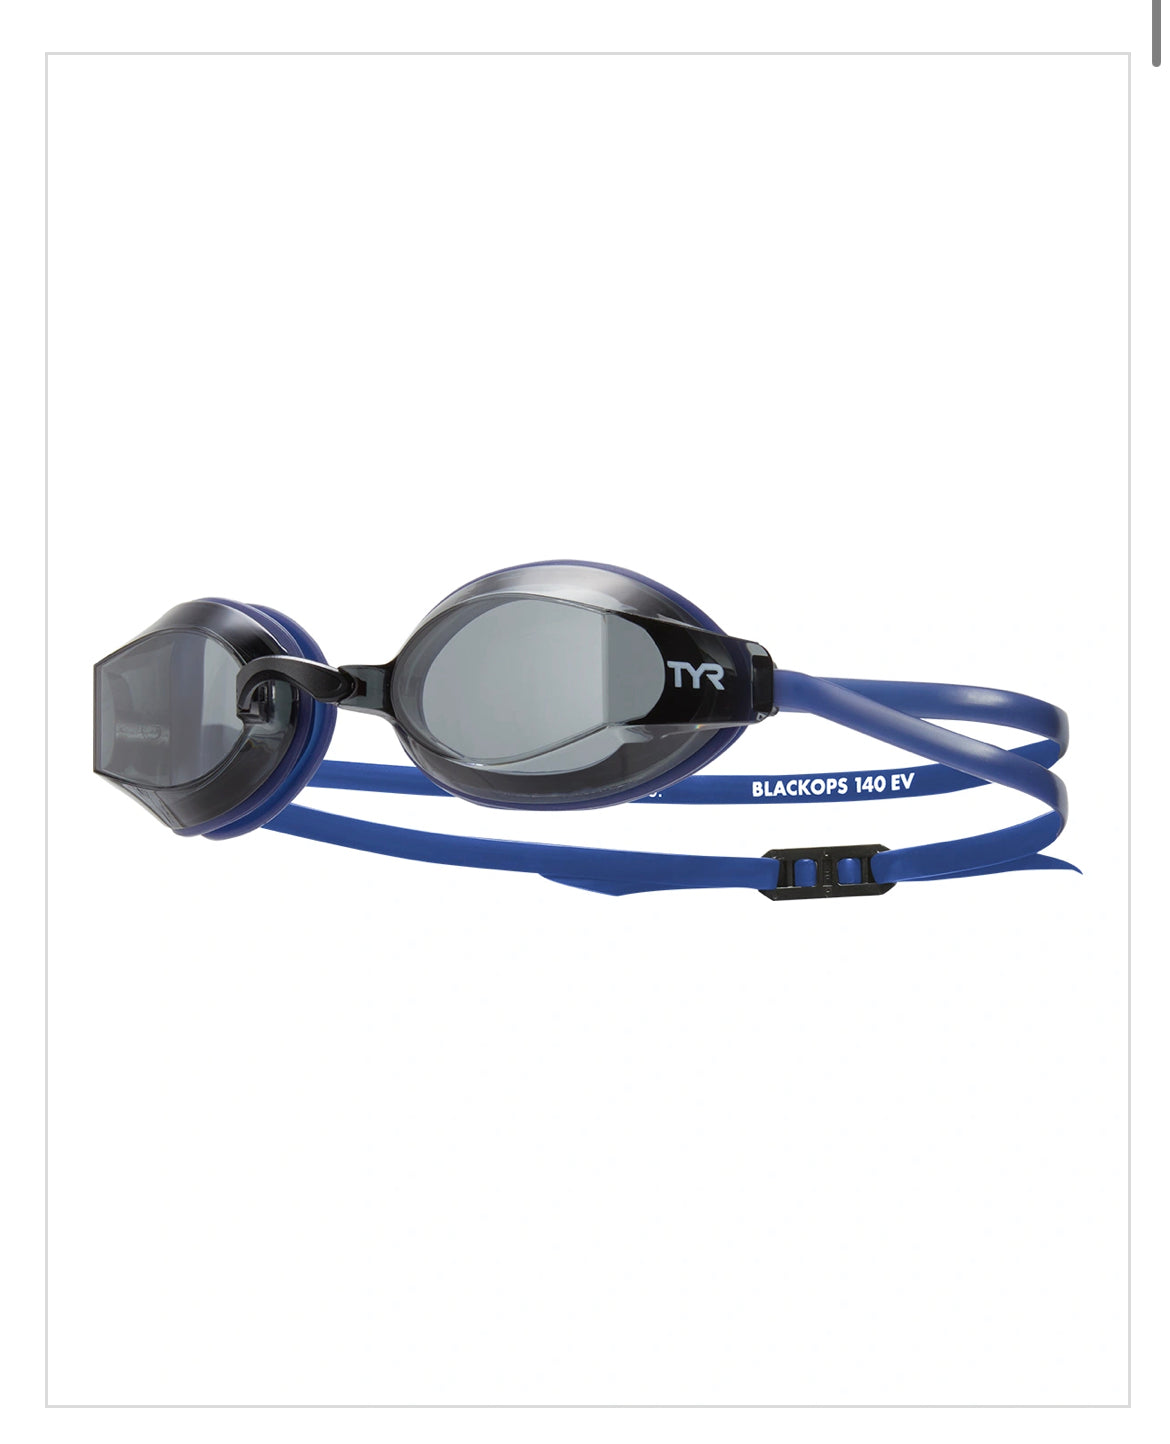 TYR Black Ops Goggle